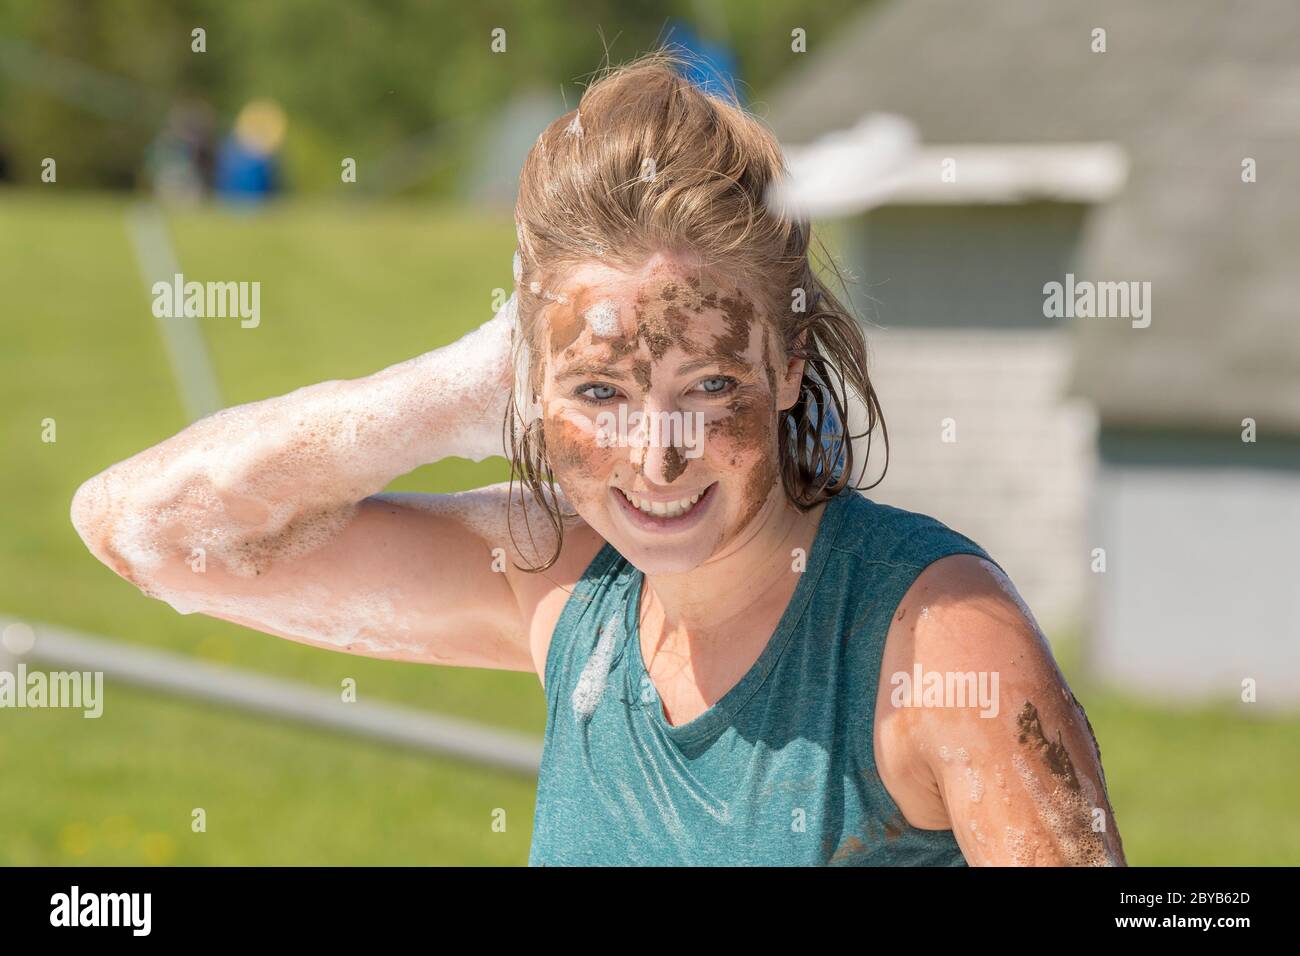 Poley Mountain, New Brunswick, Canada - June 10, 2017: Participating in the annual fundraiser 'Mud Run For Heart'. A woman covered with mud and soap s Stock Photo